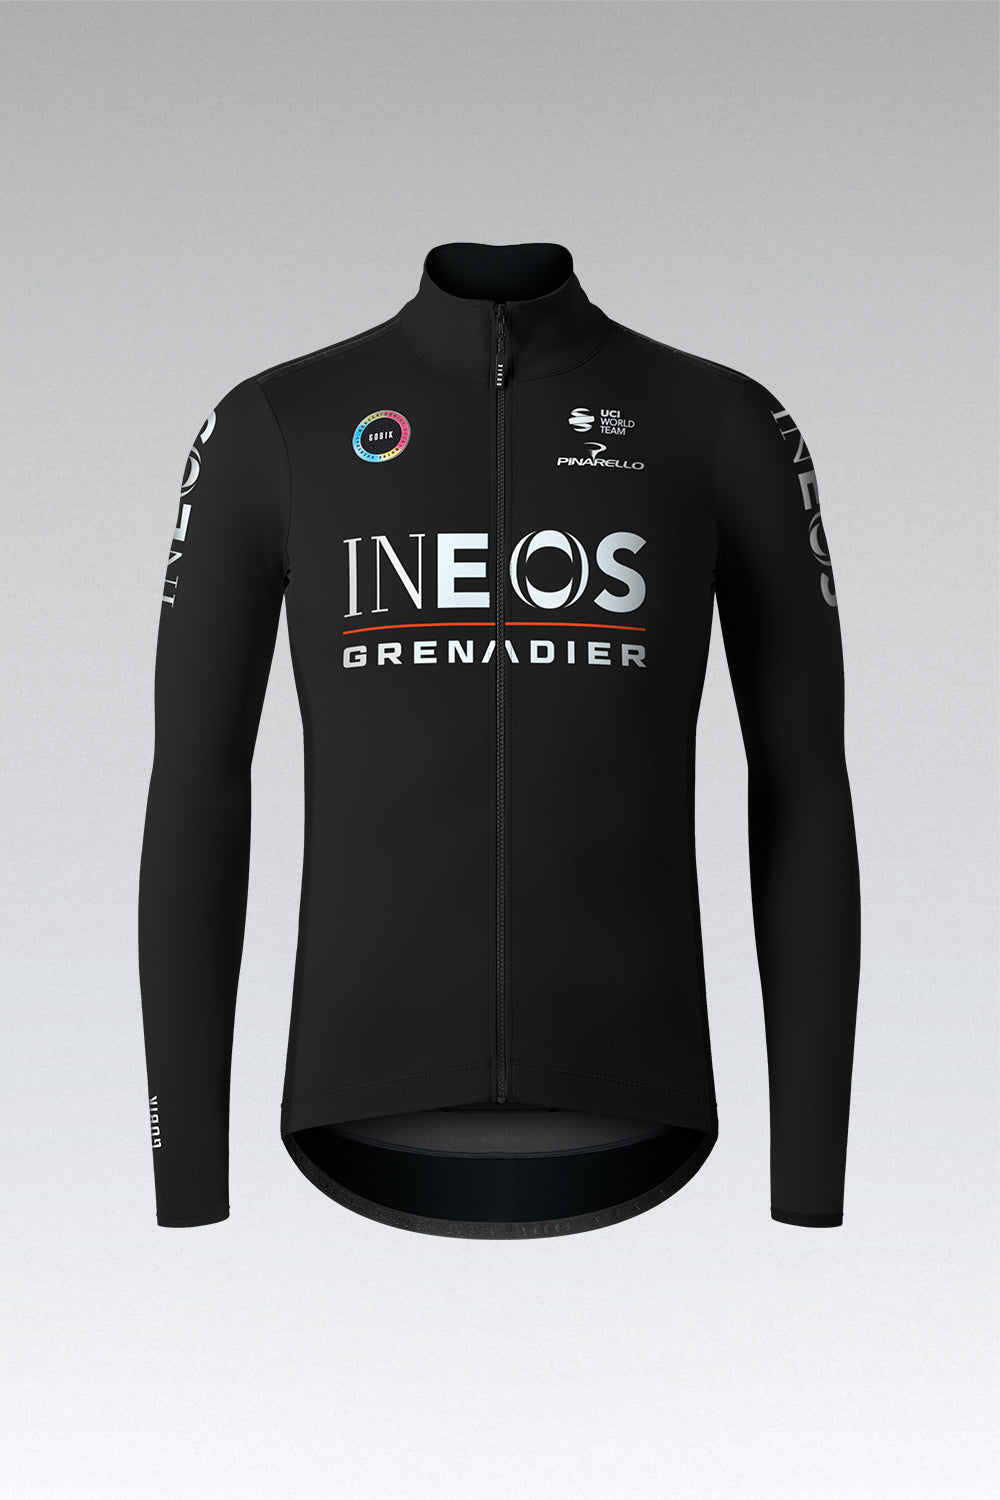 2024 GRENADIER Winter Thermal Fleece INEOS ropa ciclismo hombre invierno  bicycle clothing fietskleding heren maillot cyclisme